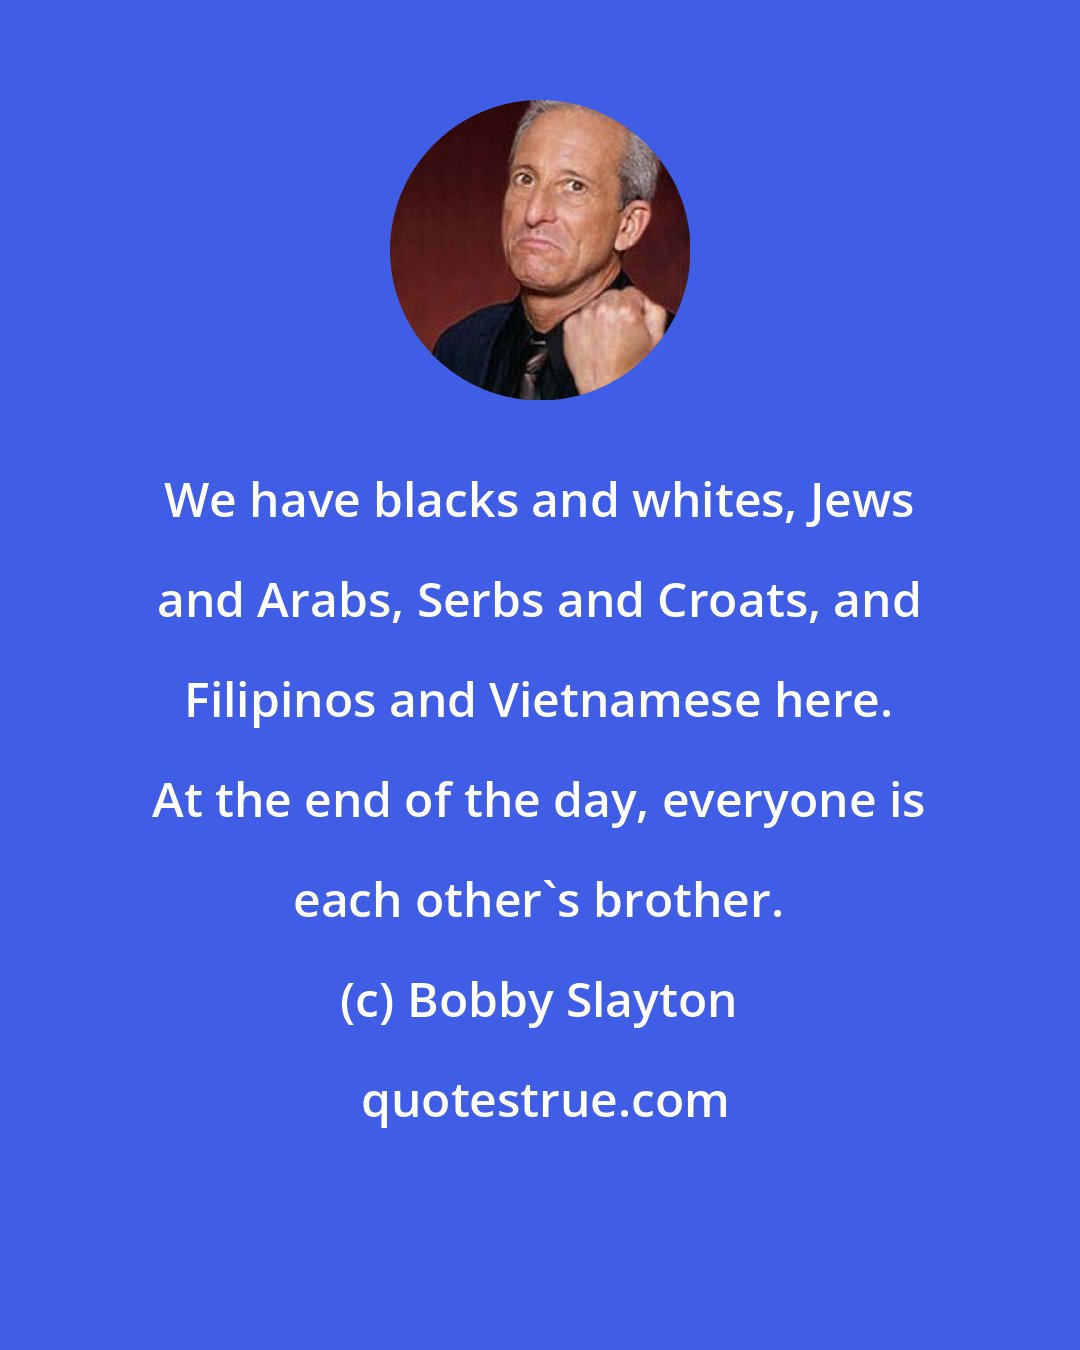 Bobby Slayton: We have blacks and whites, Jews and Arabs, Serbs and Croats, and Filipinos and Vietnamese here. At the end of the day, everyone is each other's brother.